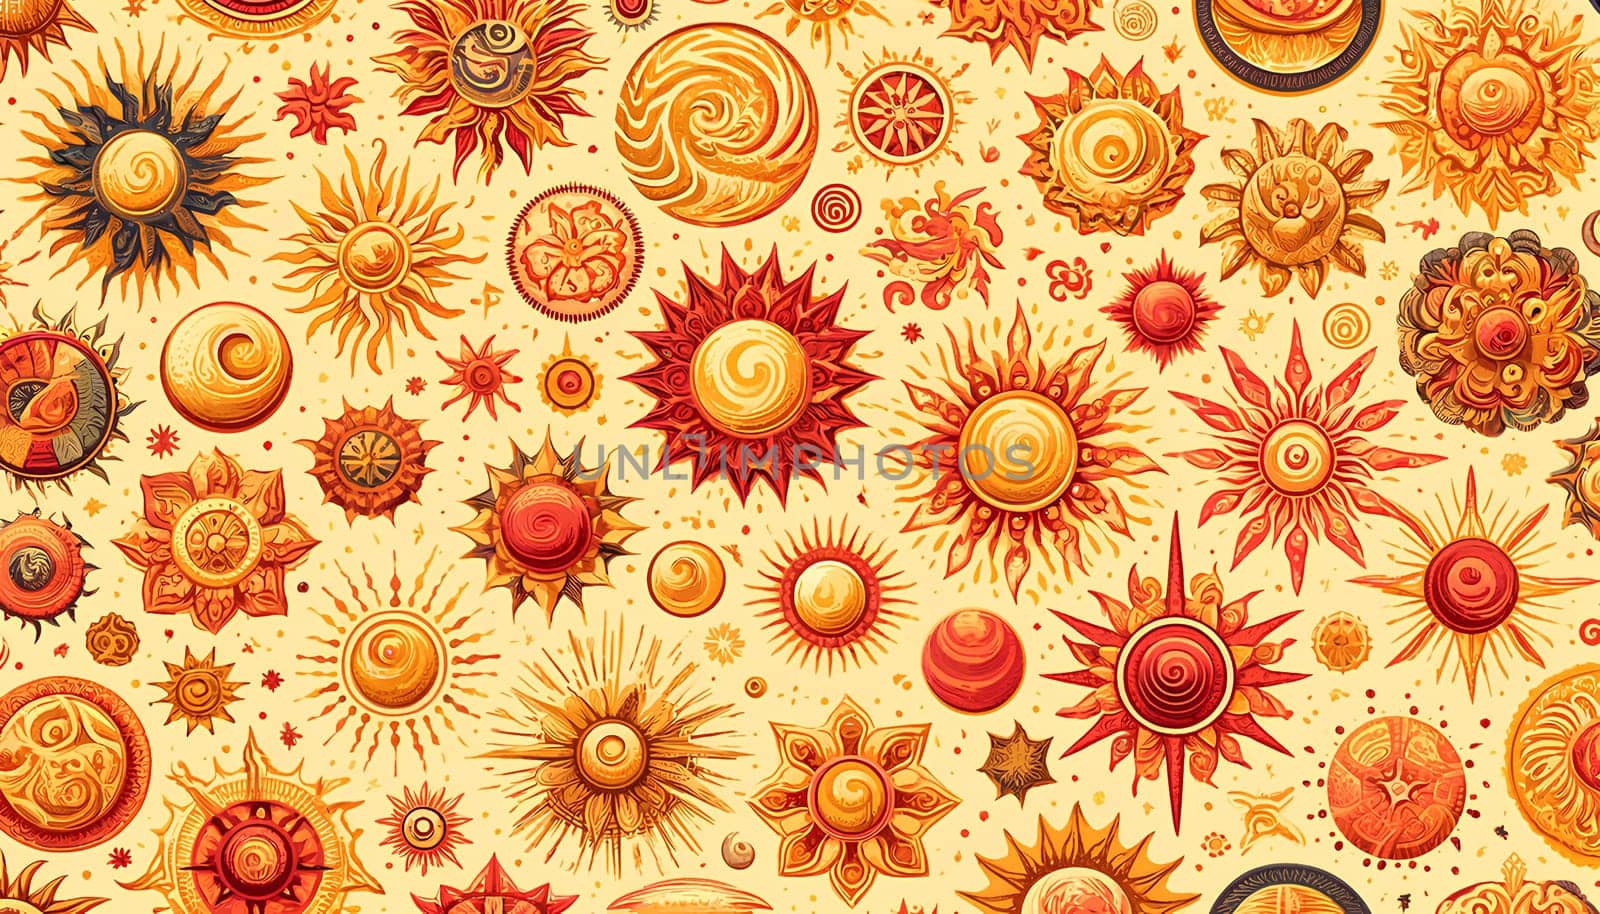 Horizontal pattern depicting suns with various designs on a light background by Annado